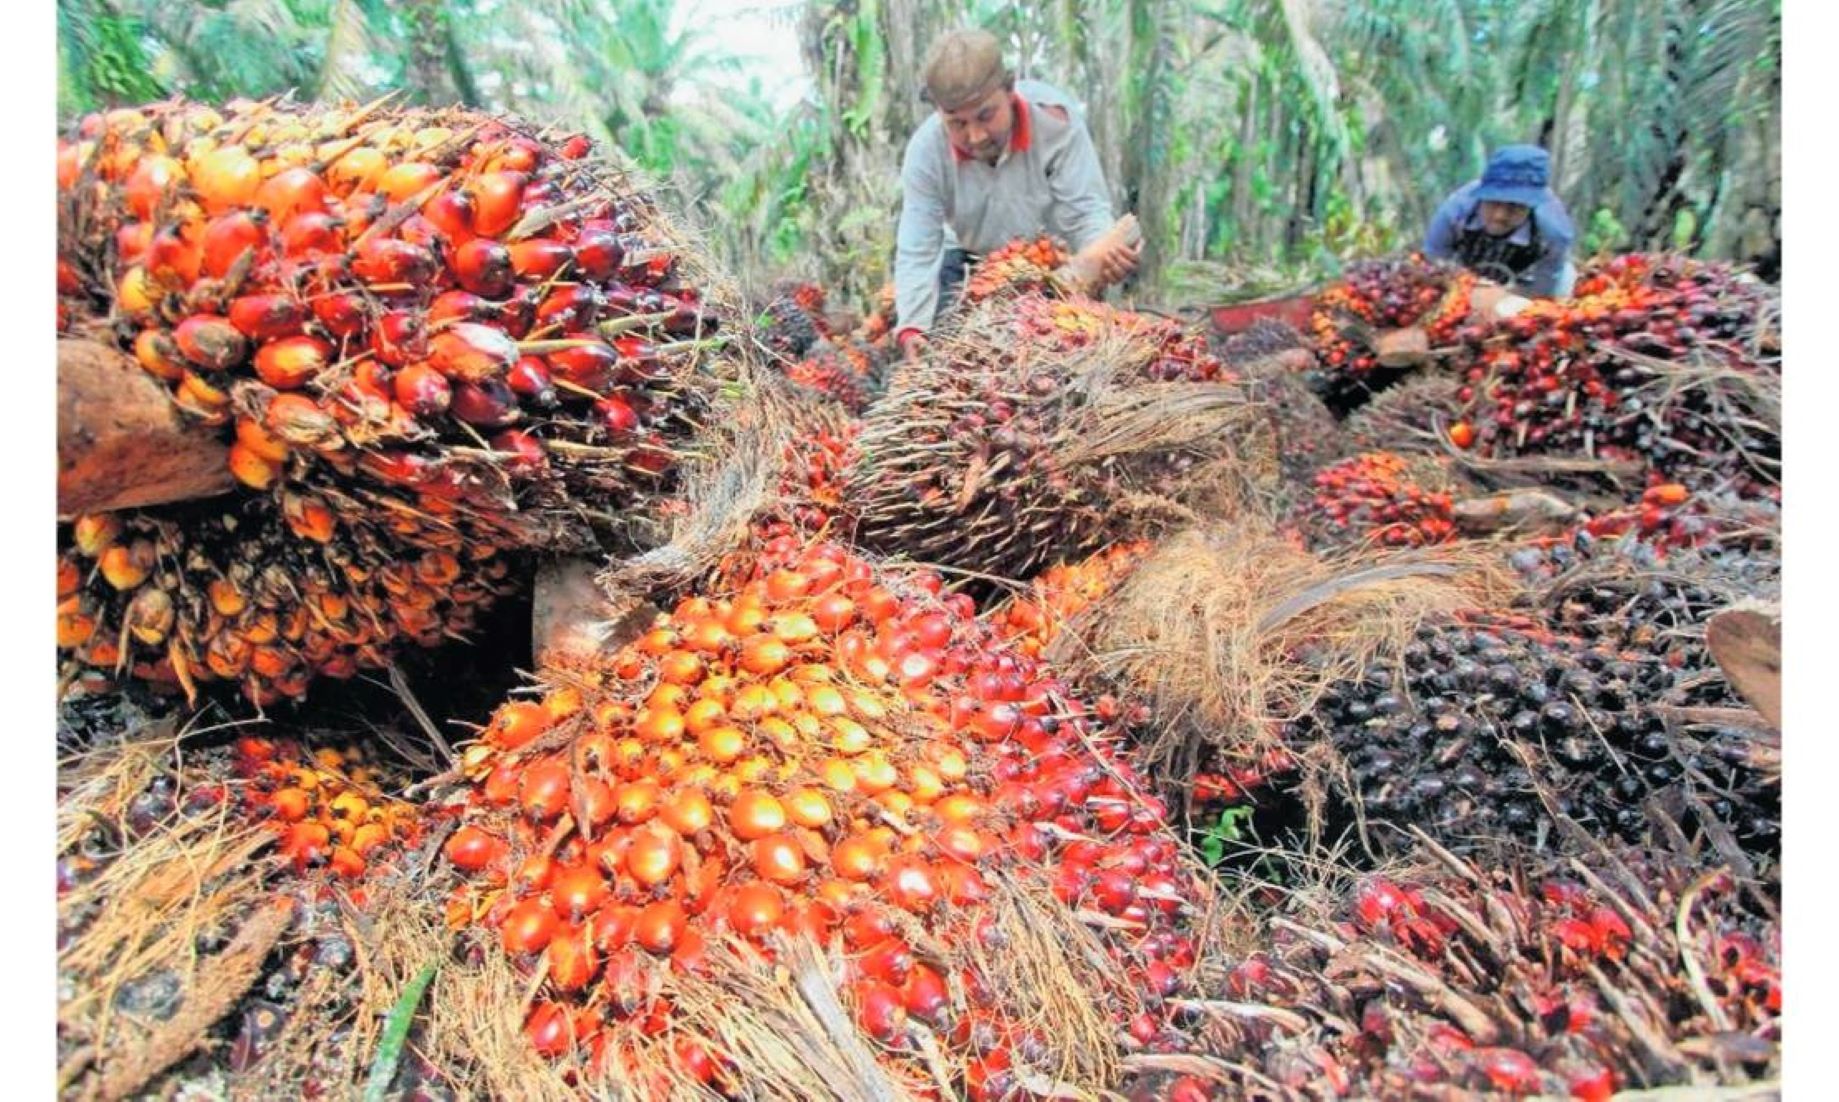 Malaysian Palm Oil Industry To Focus On Friendly Trade Partners: Minister